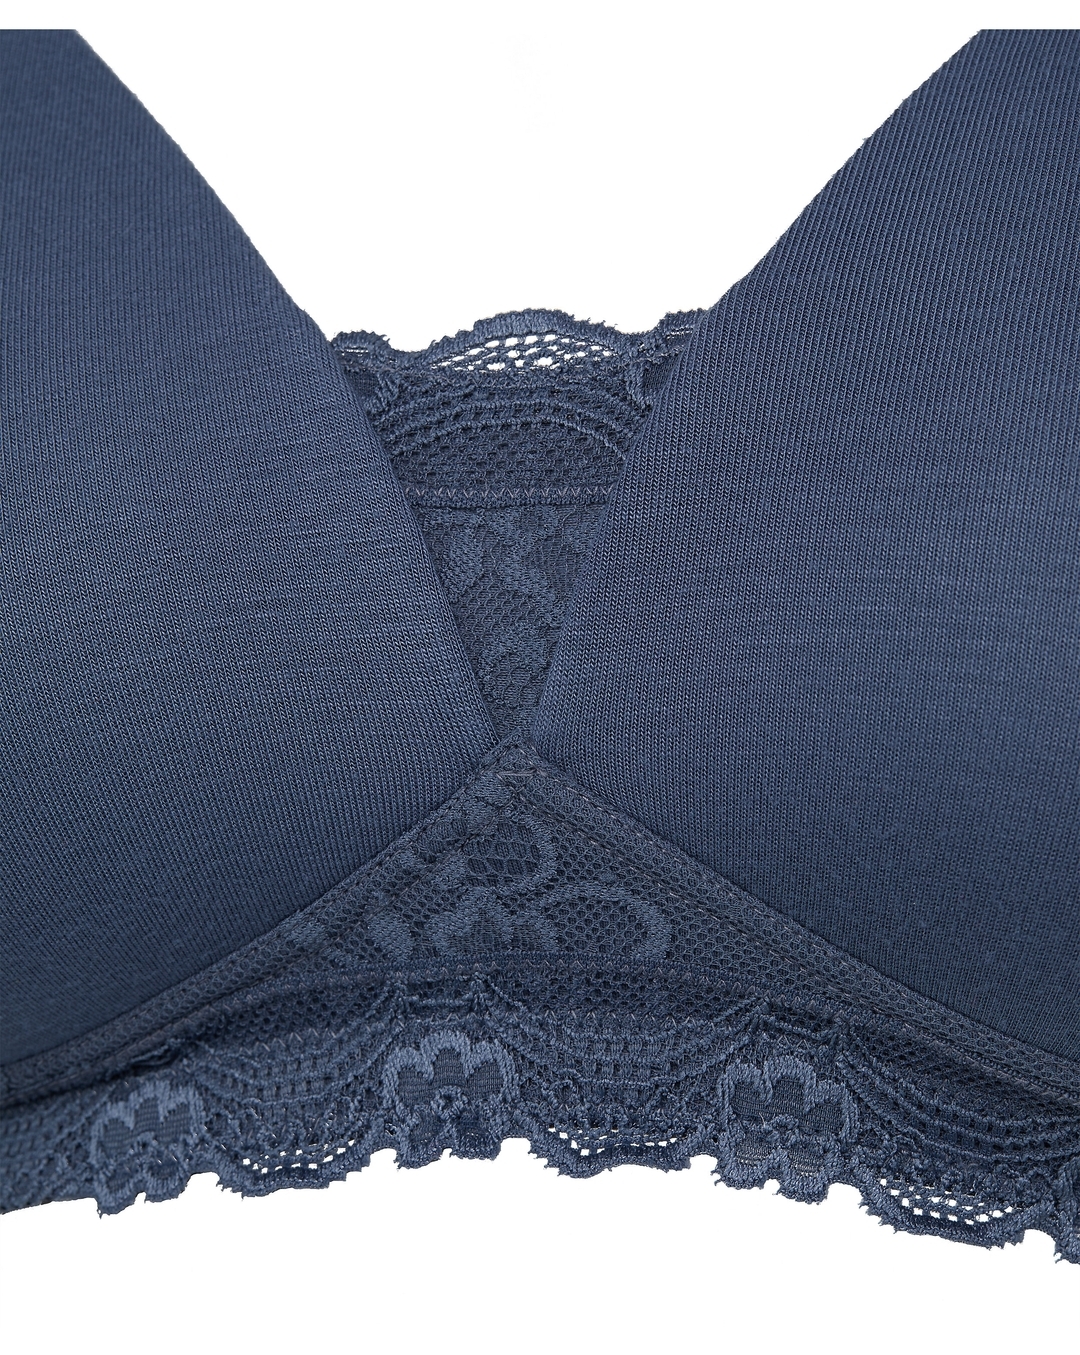 Bra with Lace Detail, for Maternity & Nursing - dark blue, Maternity